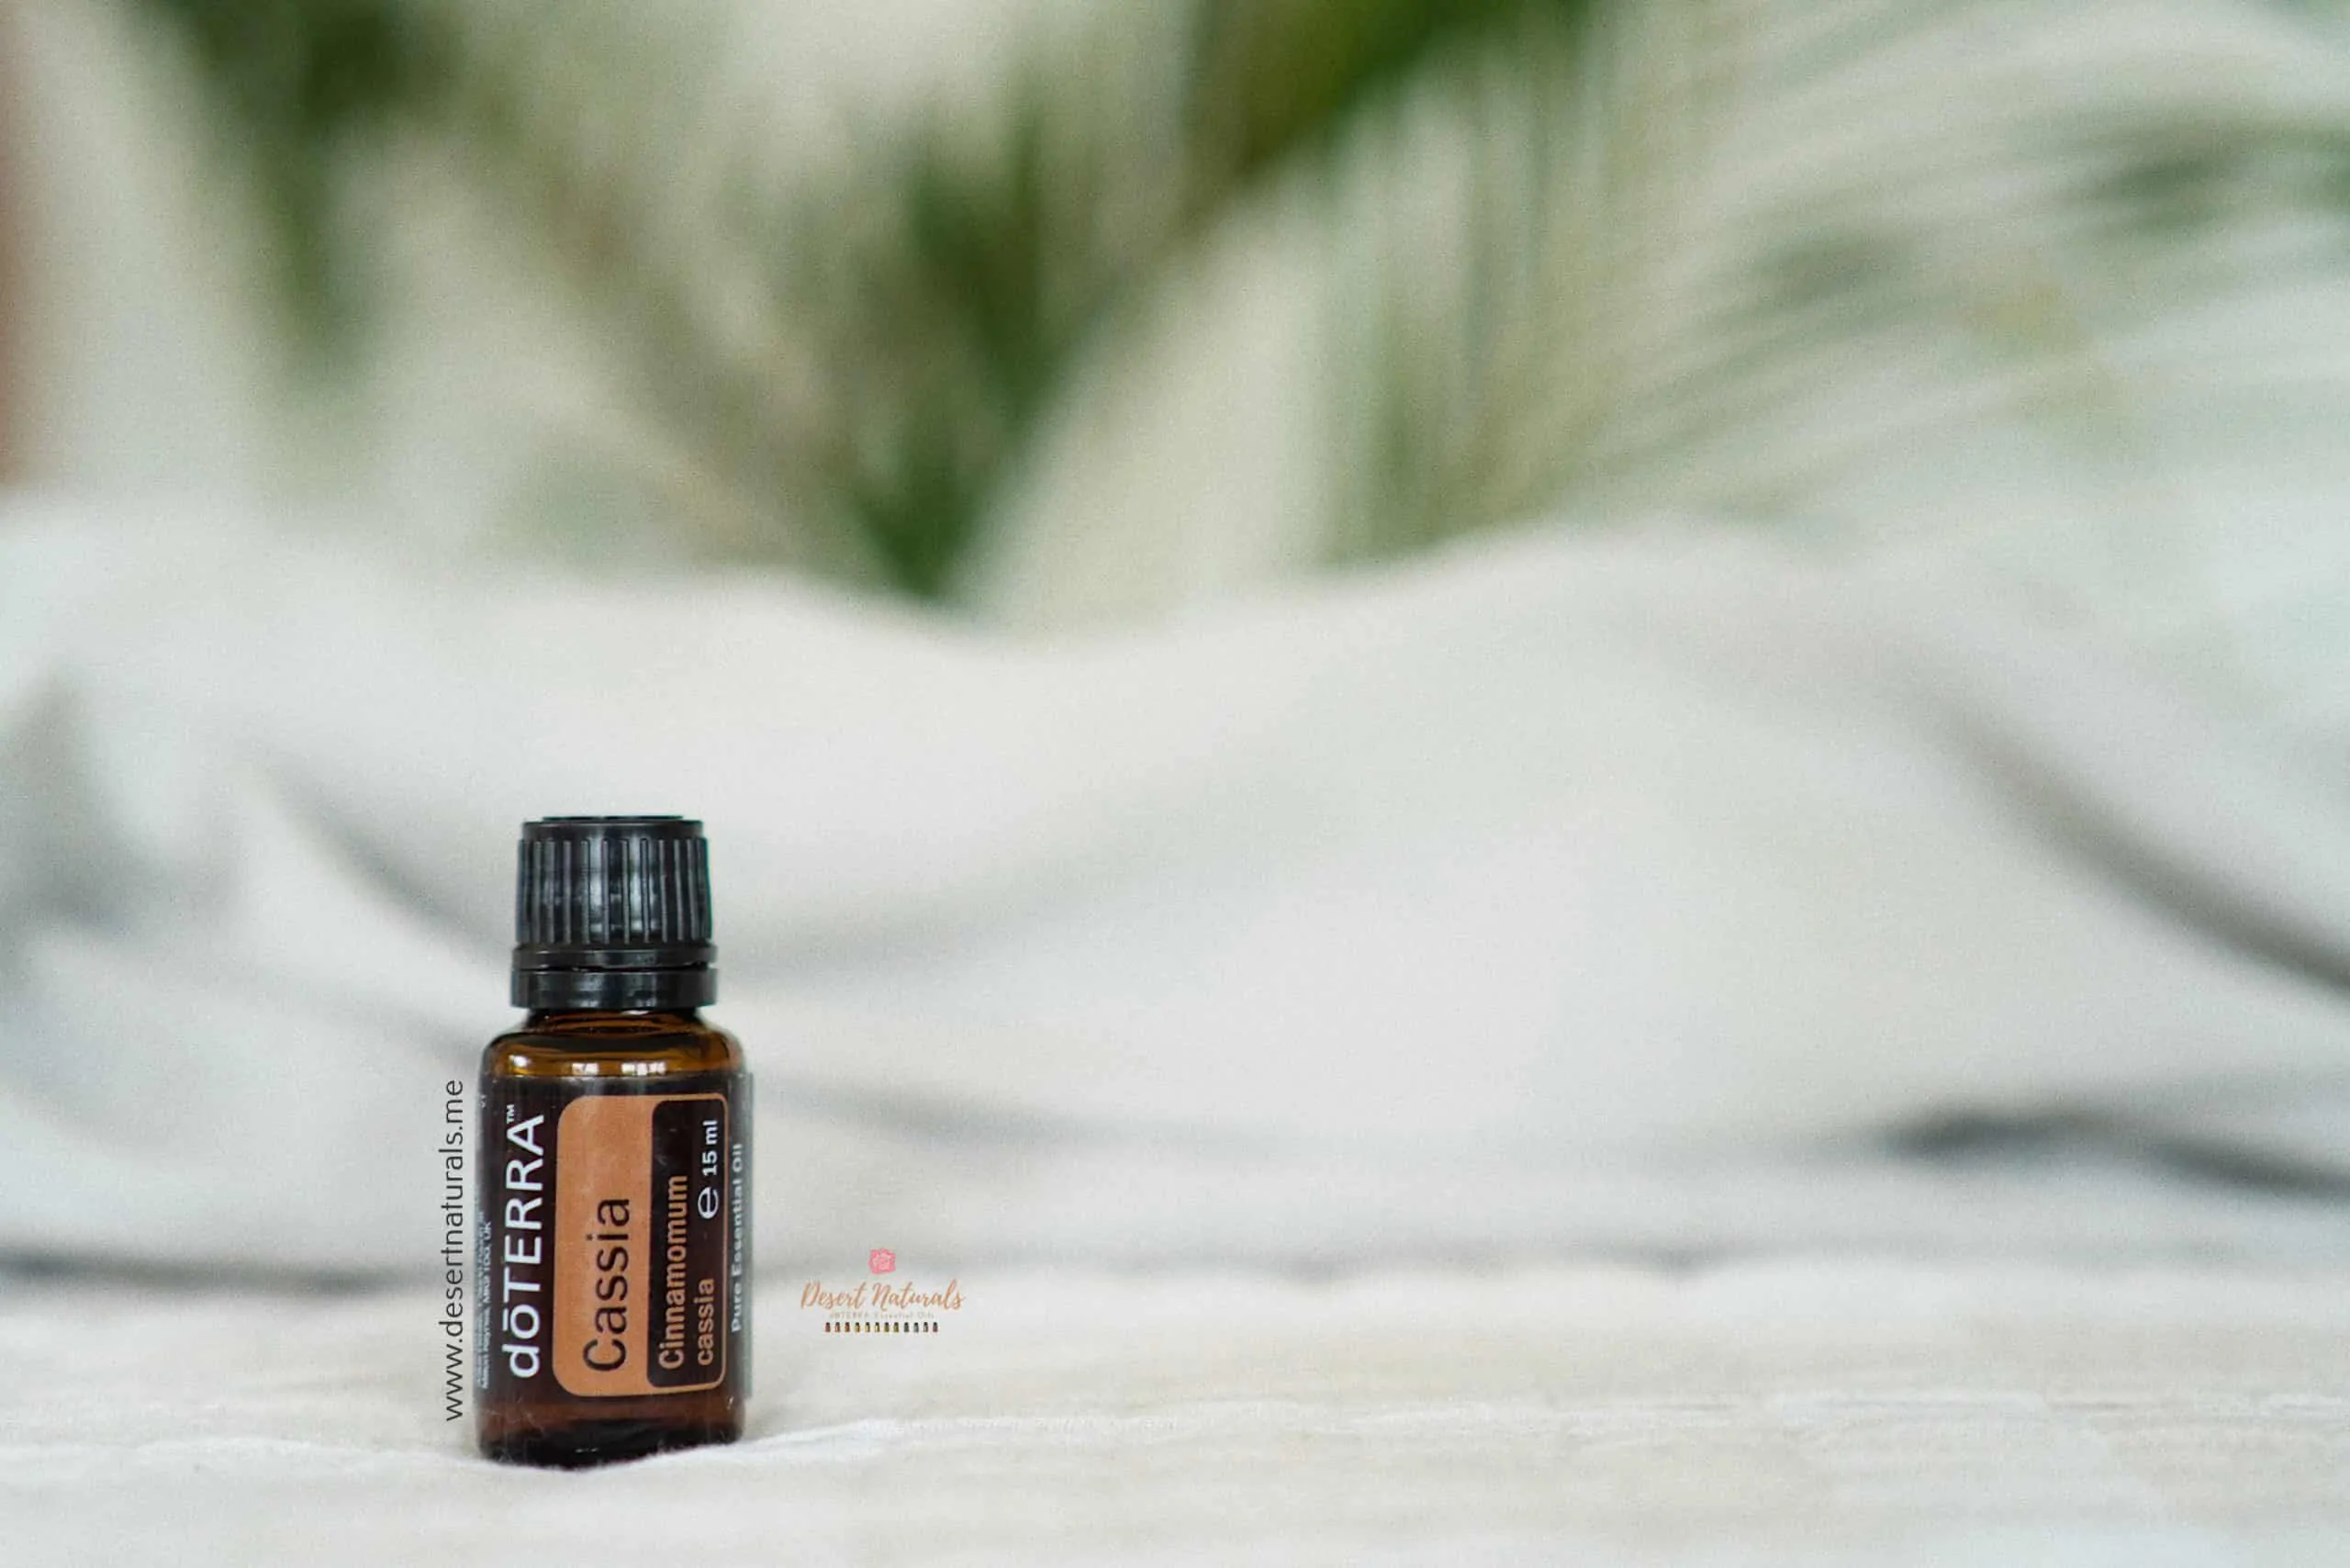 cassia essential oil from doTERRA is similar to cinnamon essential oil and can help with weight loss